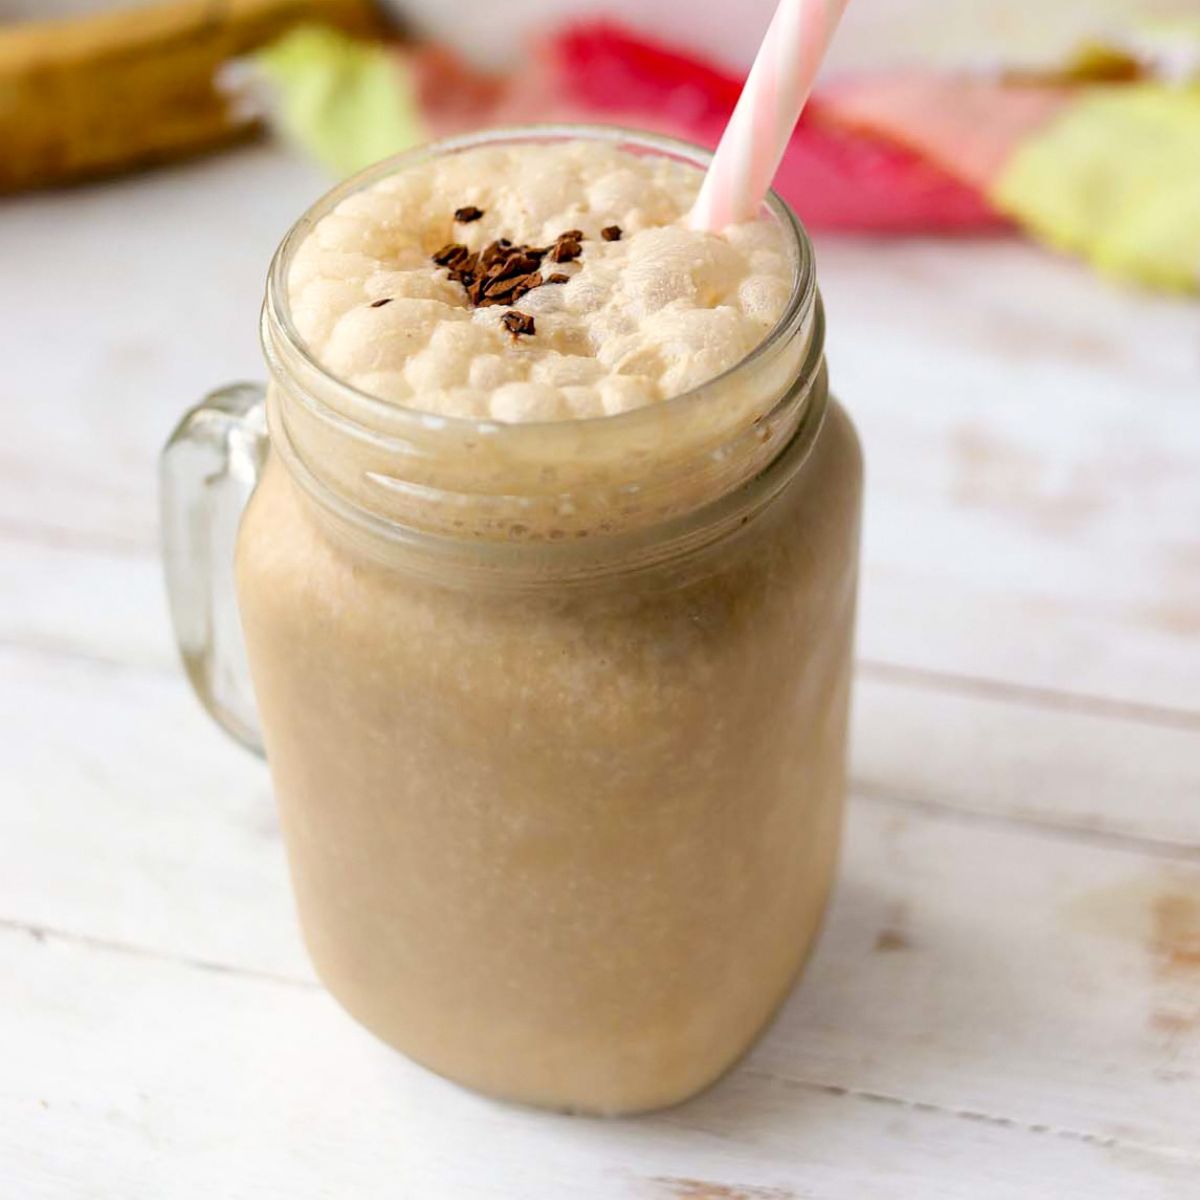 https://www.simplylowcal.com/wp-content/uploads/2022/11/low-calorie-protein-shake-thumbnail.jpg